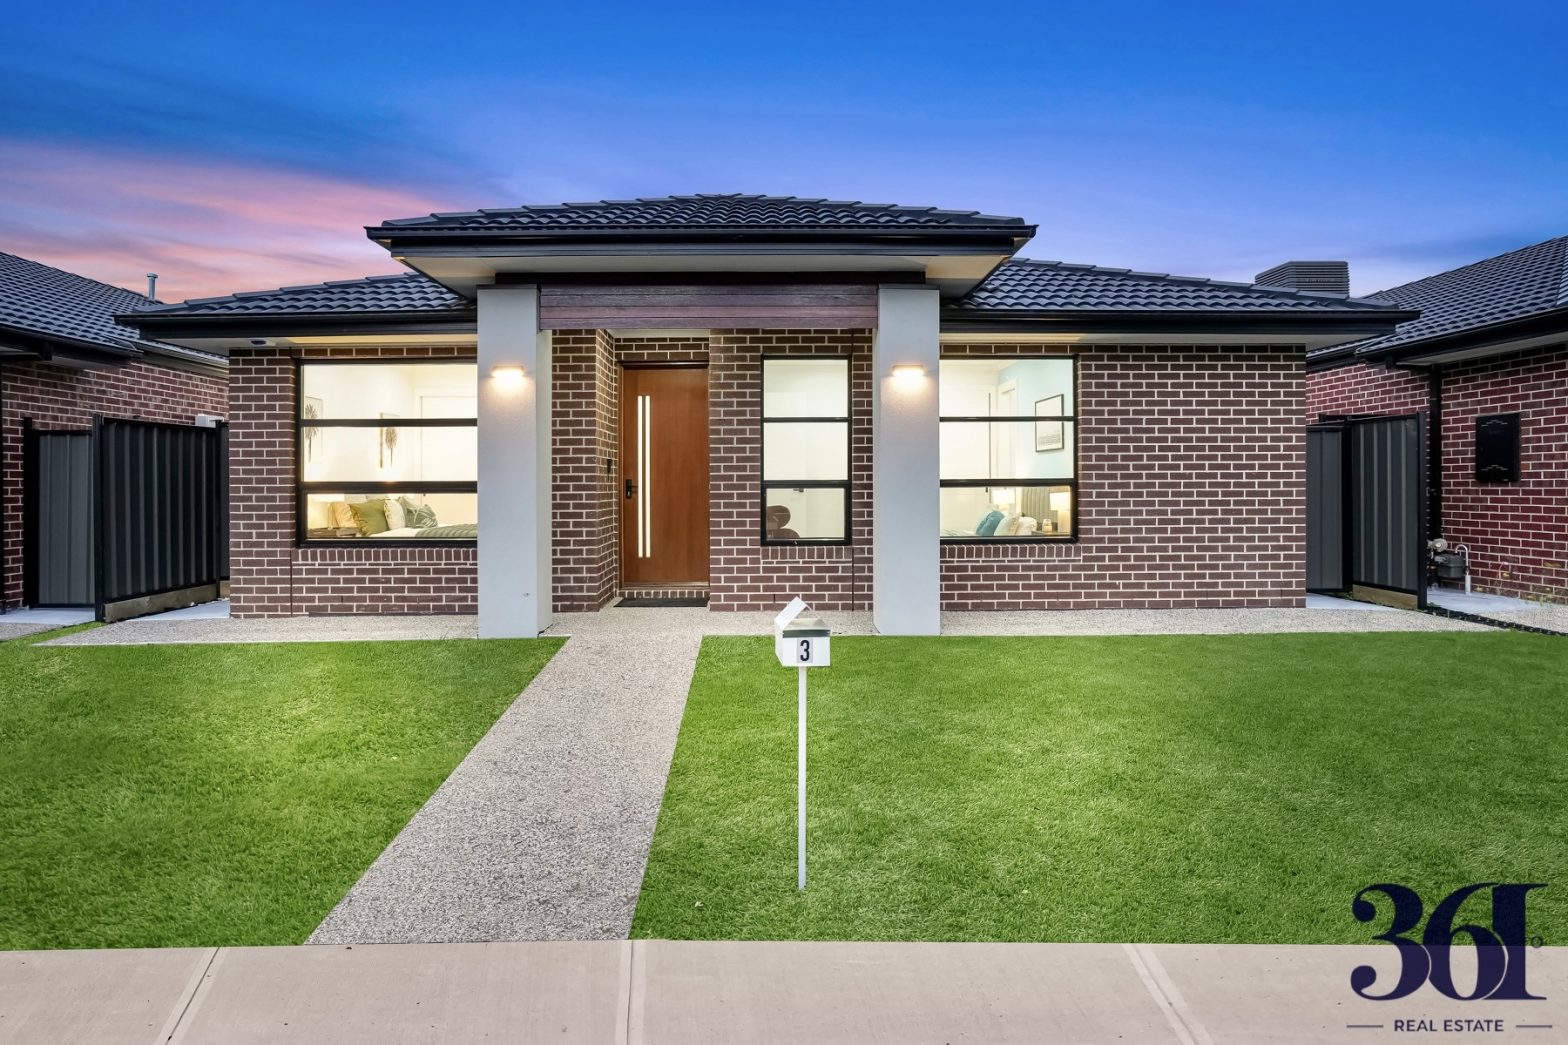 BRAND NEW SPECTACULAR 4 BEDROOM ABODE WITH GREAT LOCATION & UPGRADES IN BELLA ROSA ESTATE, WERRIBEE!!!